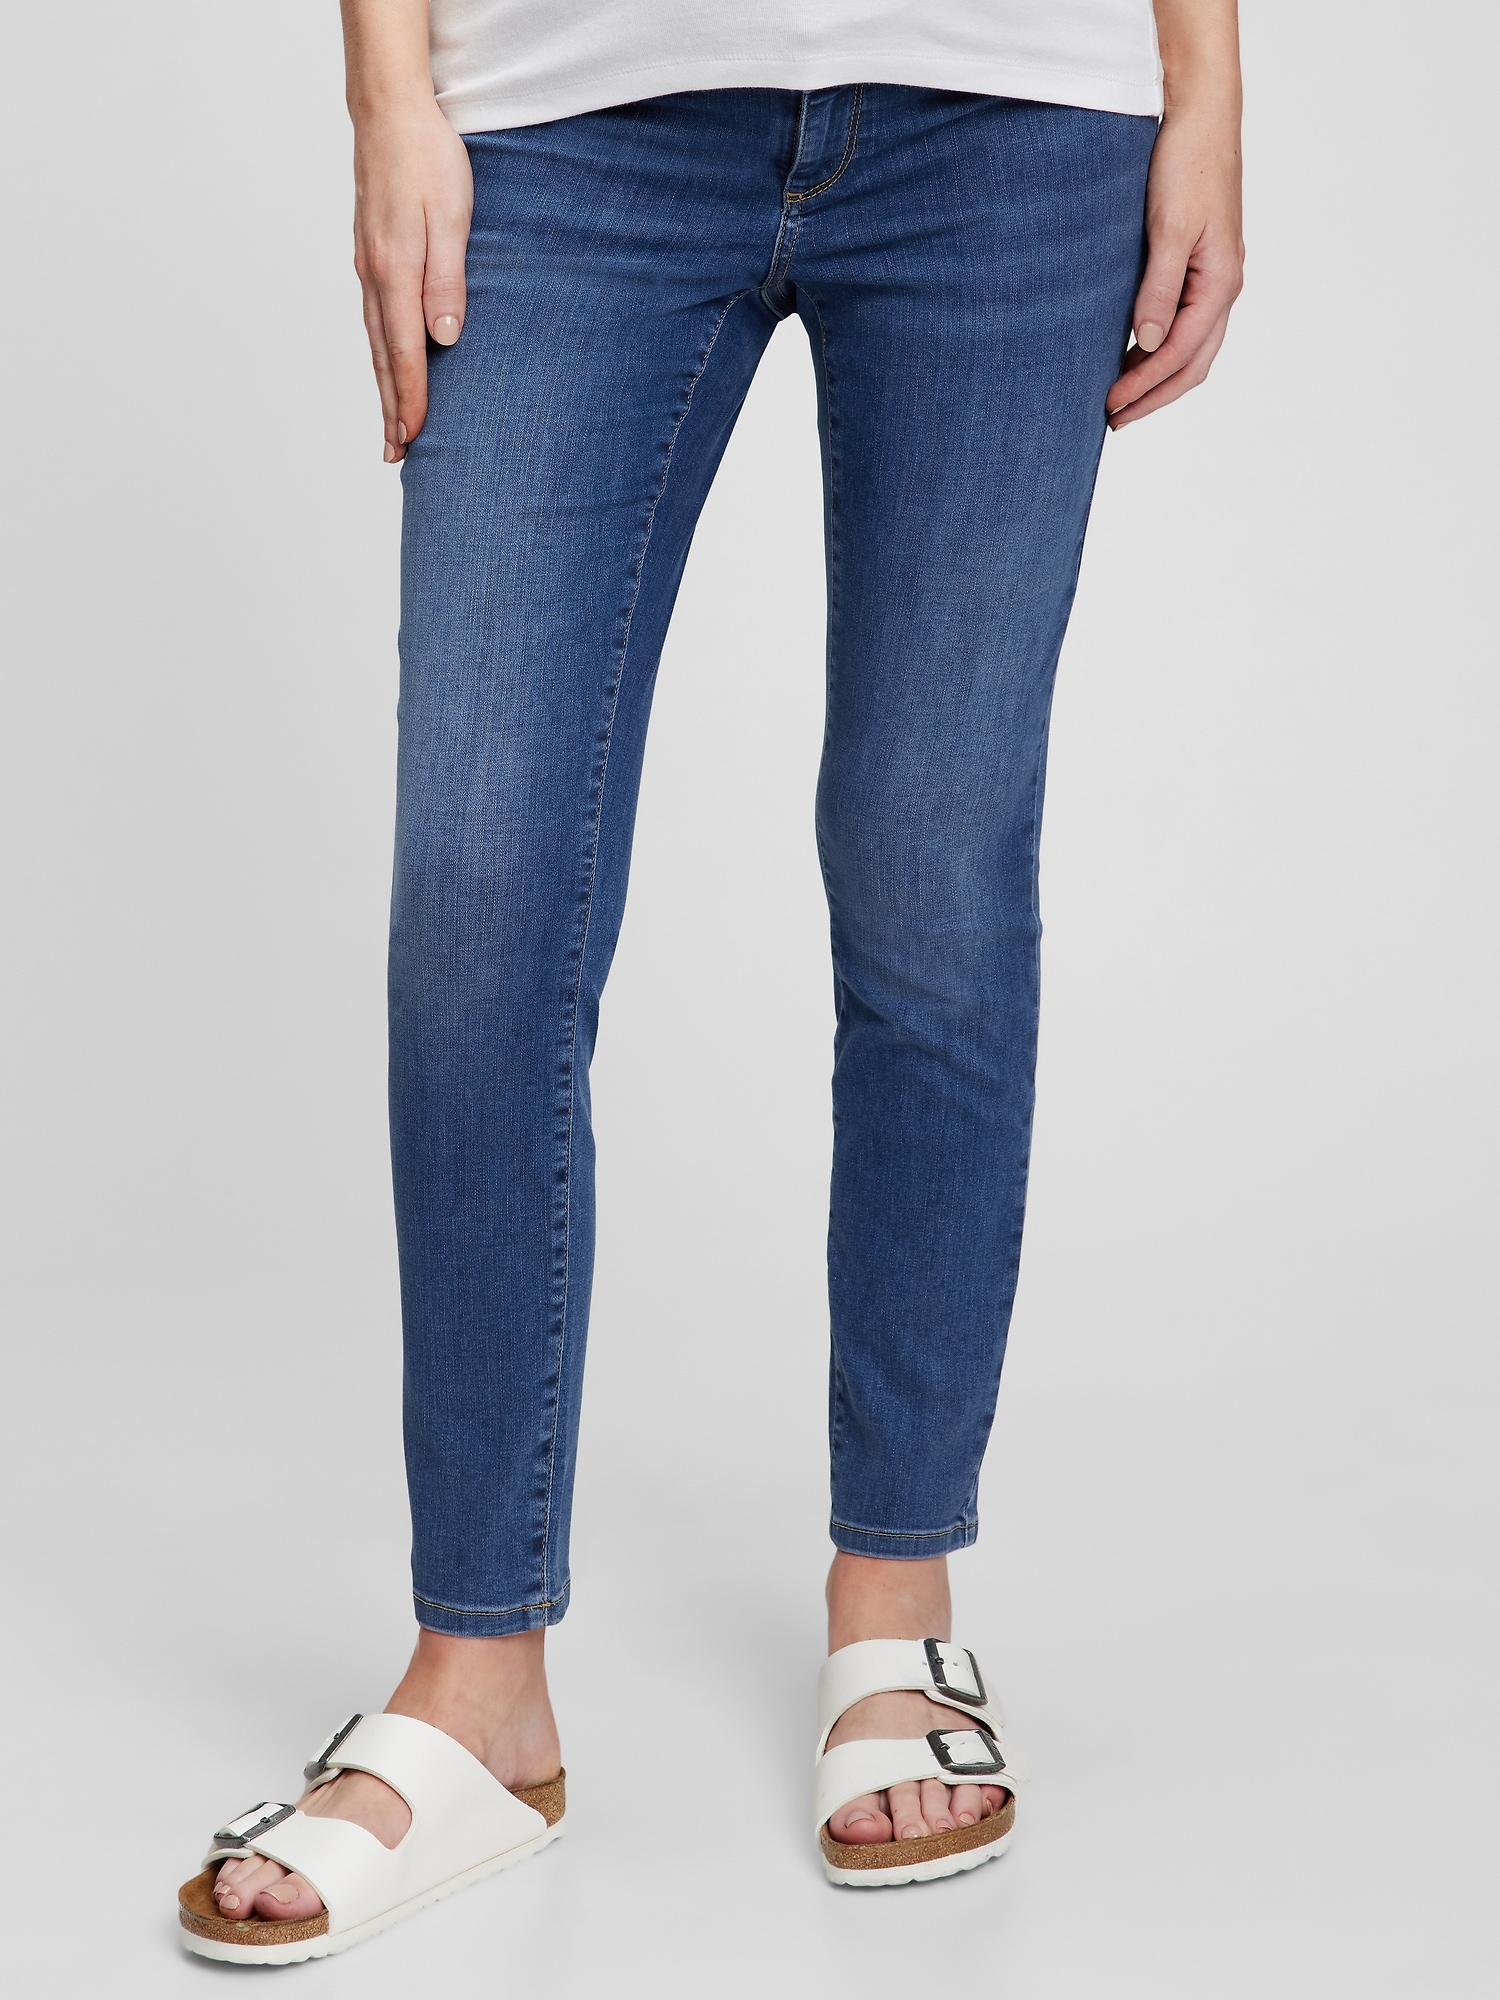 Gap Maternity Inset Panel Favorite Jeggings with Washwell